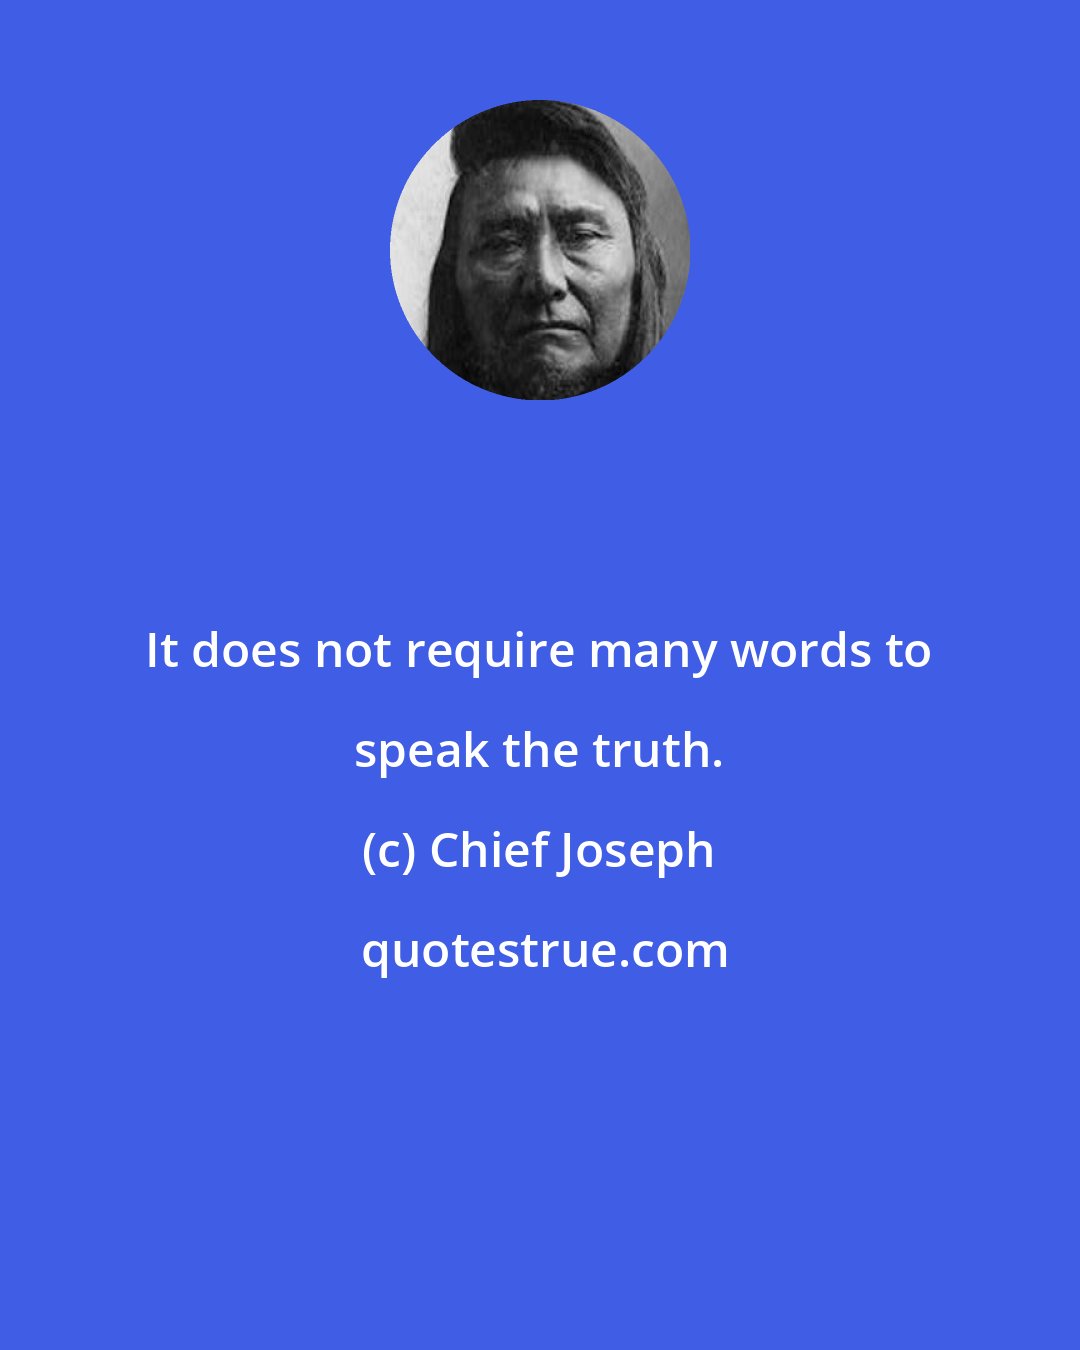 Chief Joseph: It does not require many words to speak the truth.